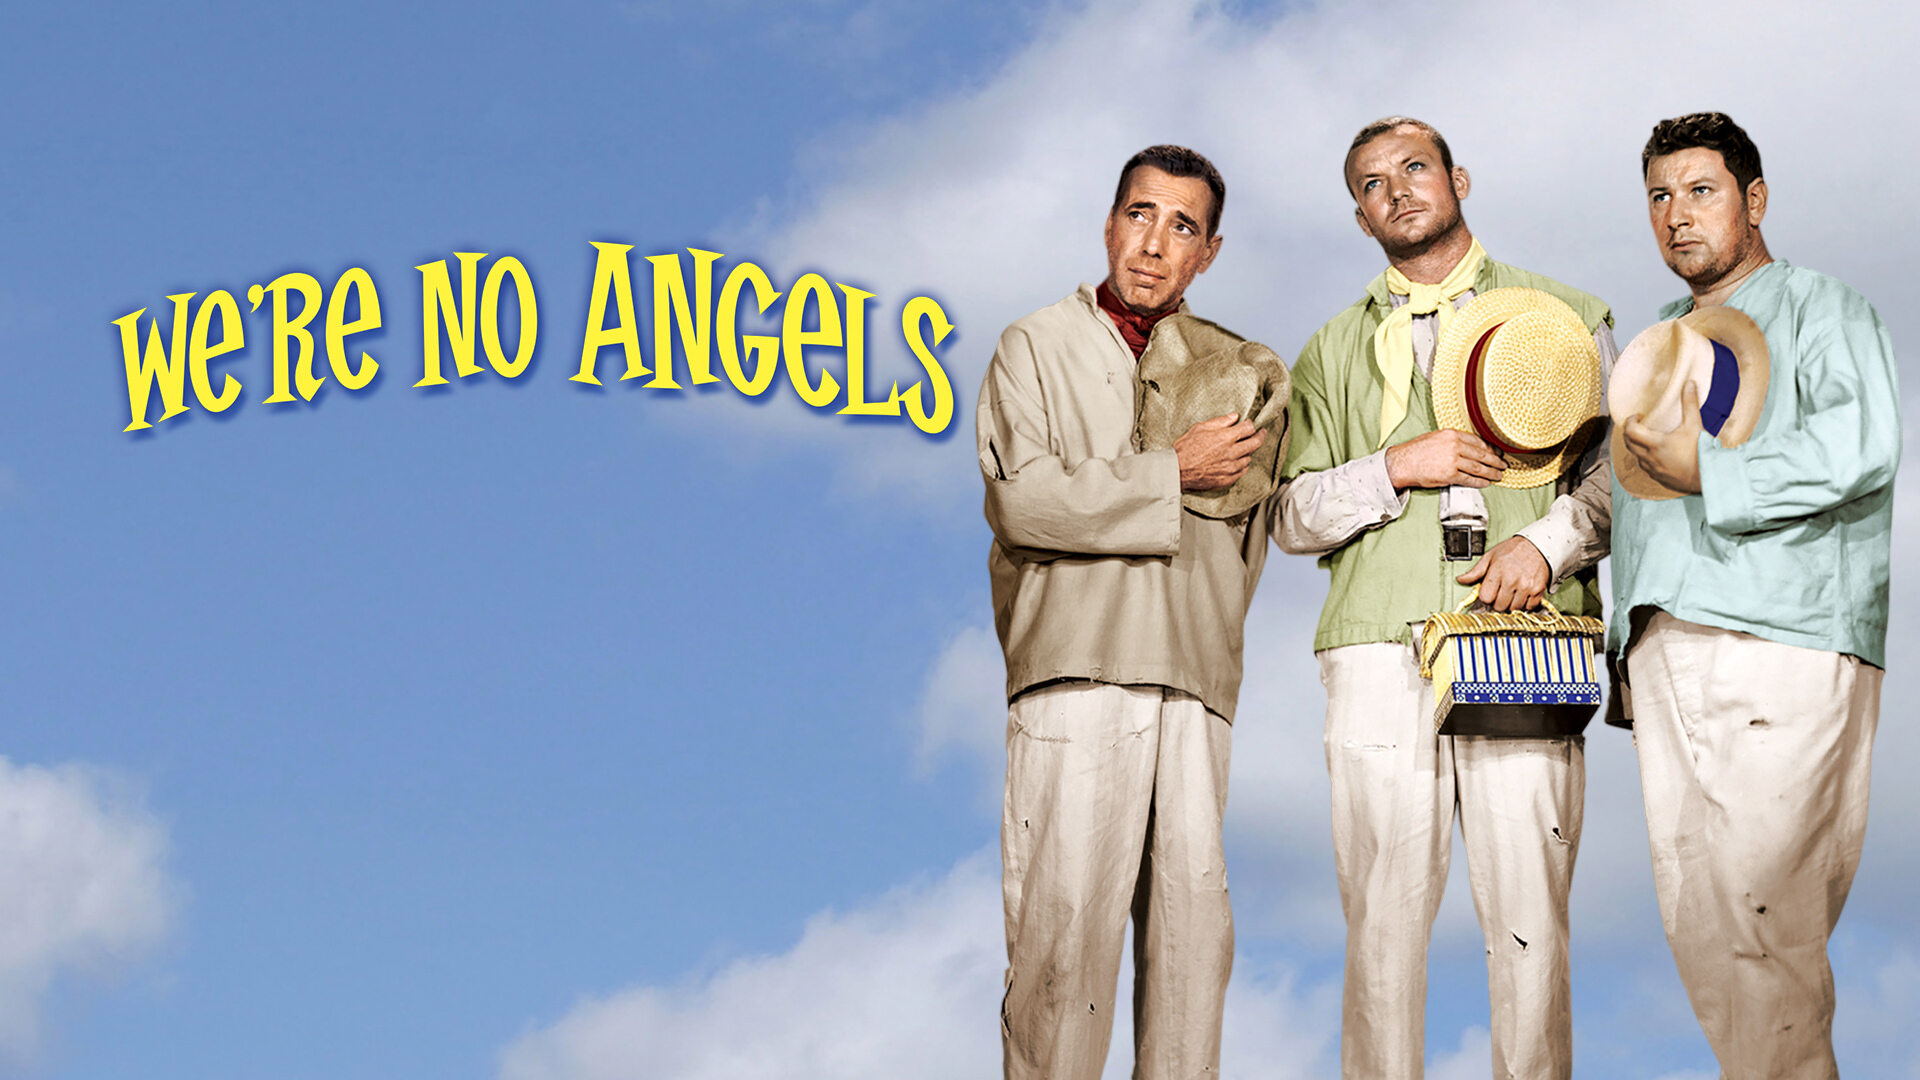 31-facts-about-the-movie-were-no-angels